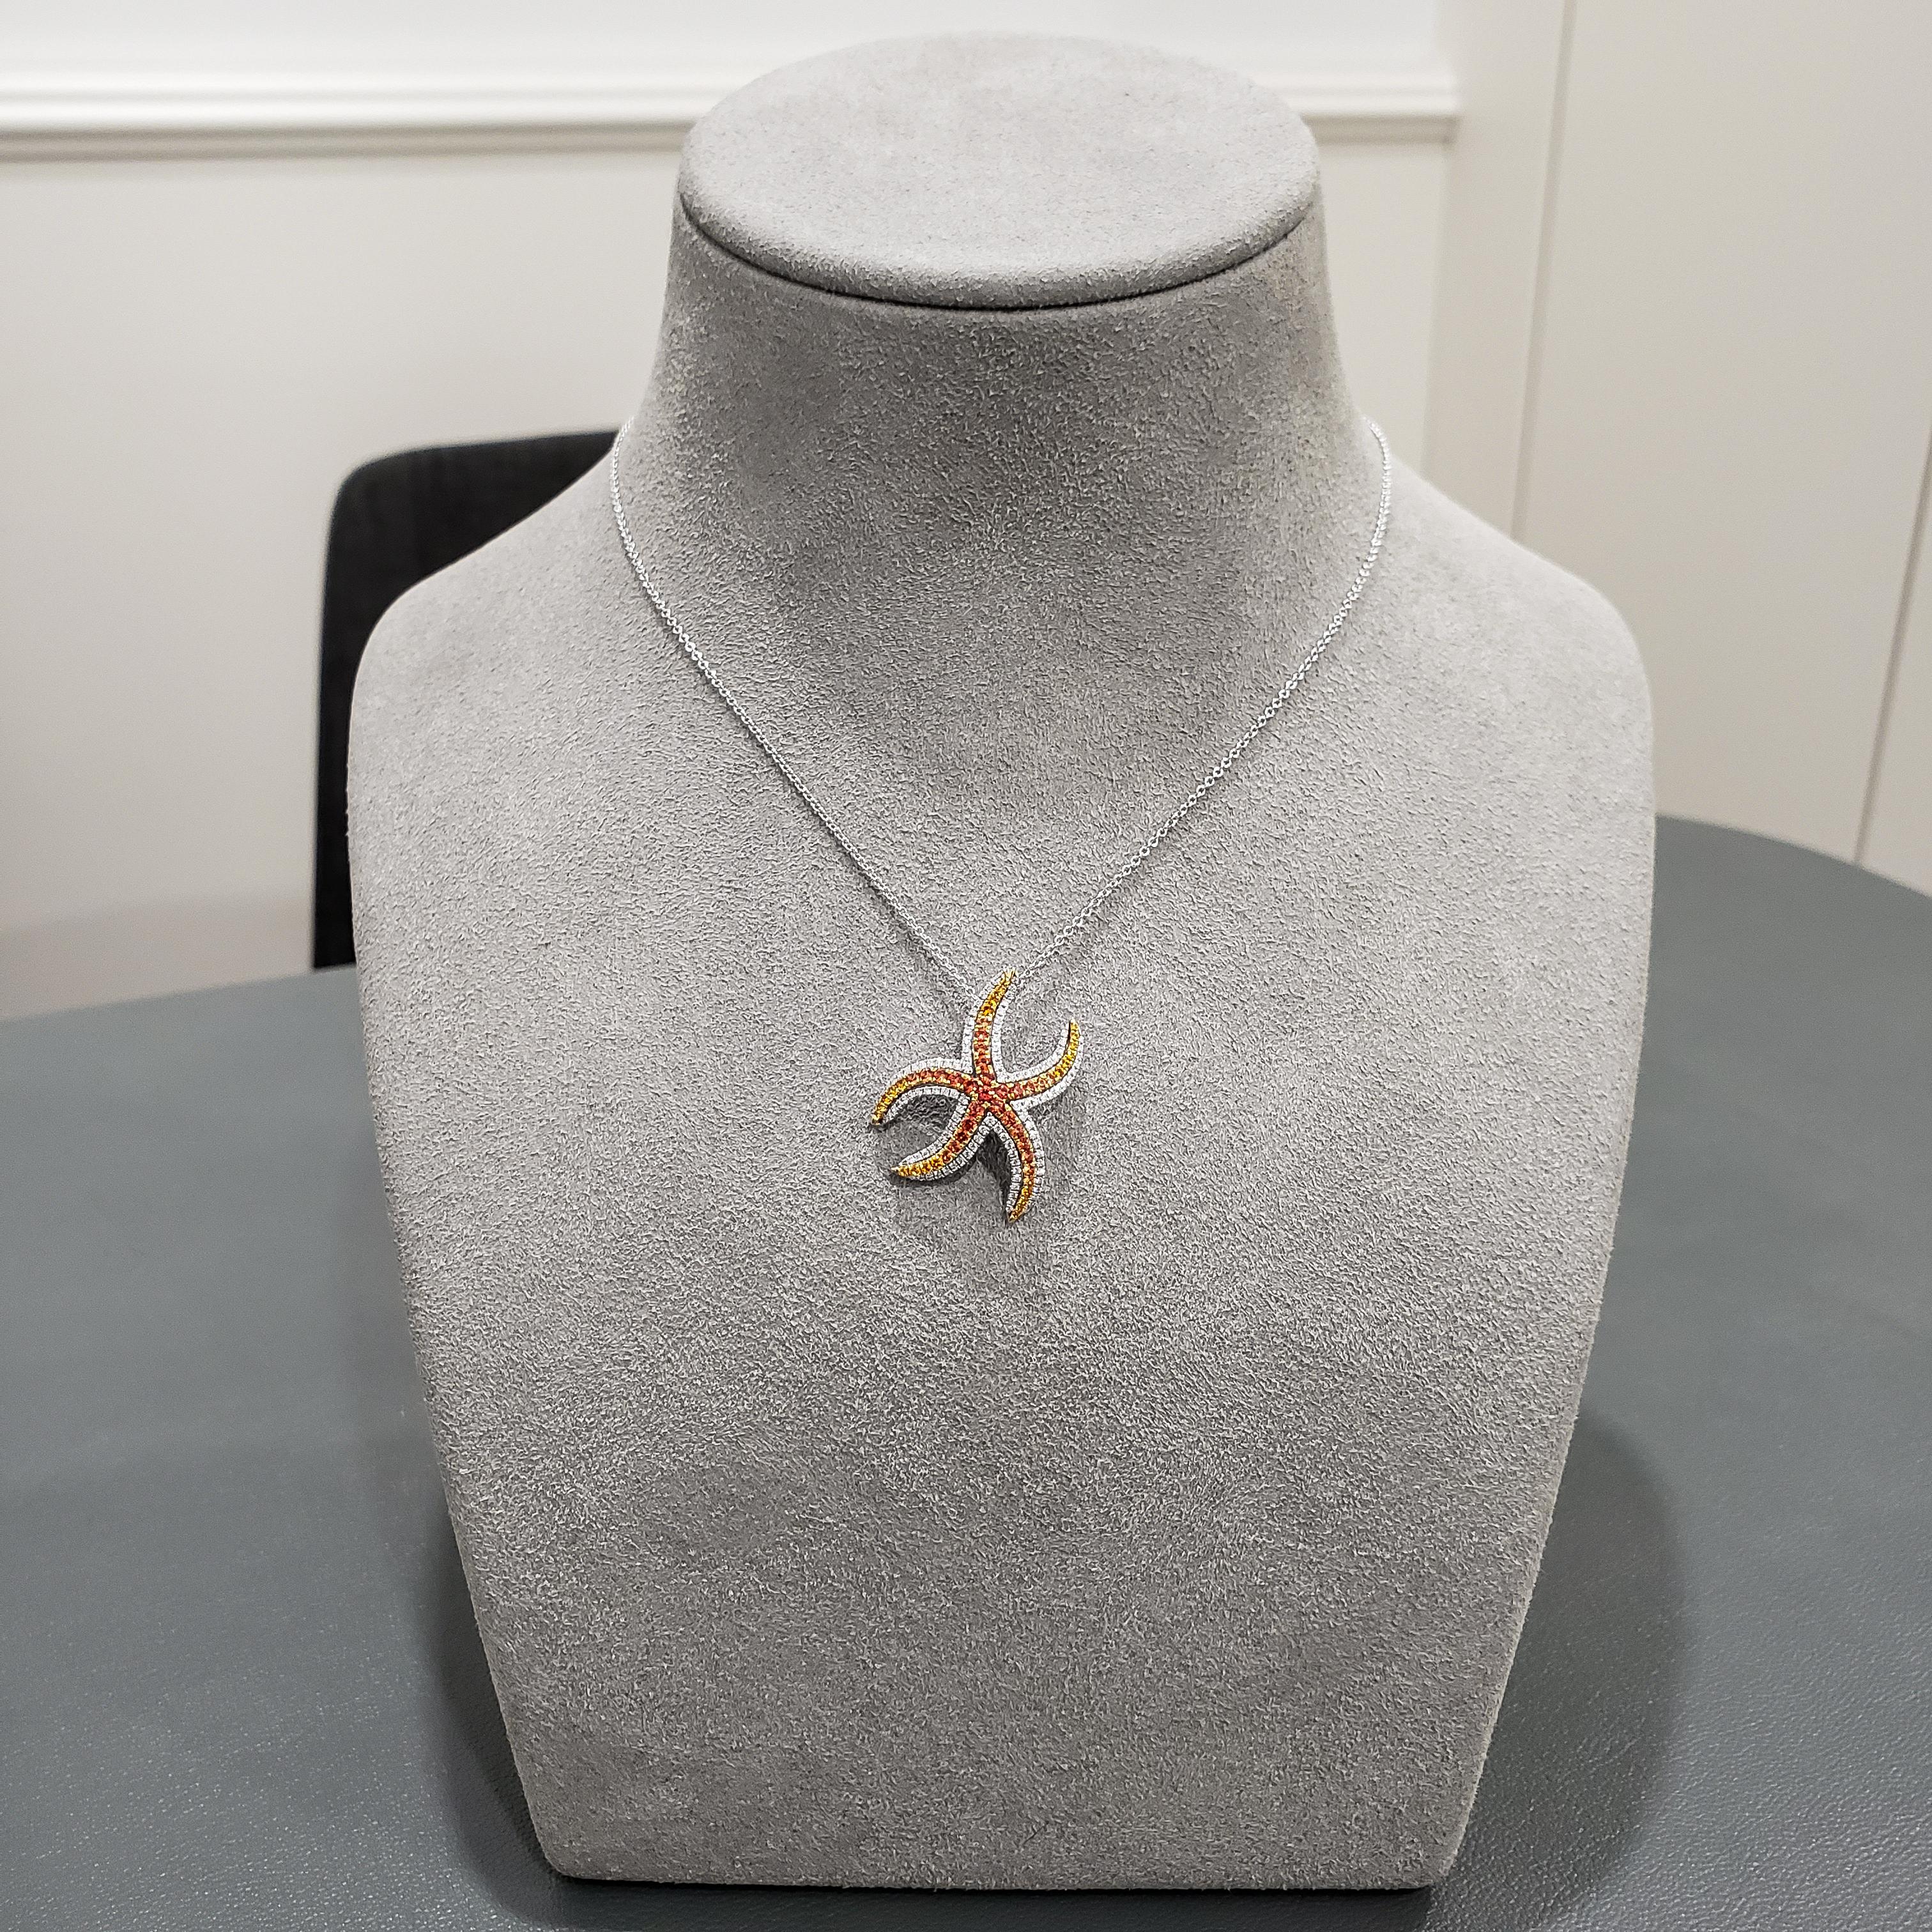 A starfish shaped pendant set with 0.68 carats total of yellow sapphire, accented with round brilliant diamonds. Diamonds weigh 0.35 carats total. Made in 18 karat white gold. Suspended on an 18 inch chain (adjustable upon request).

